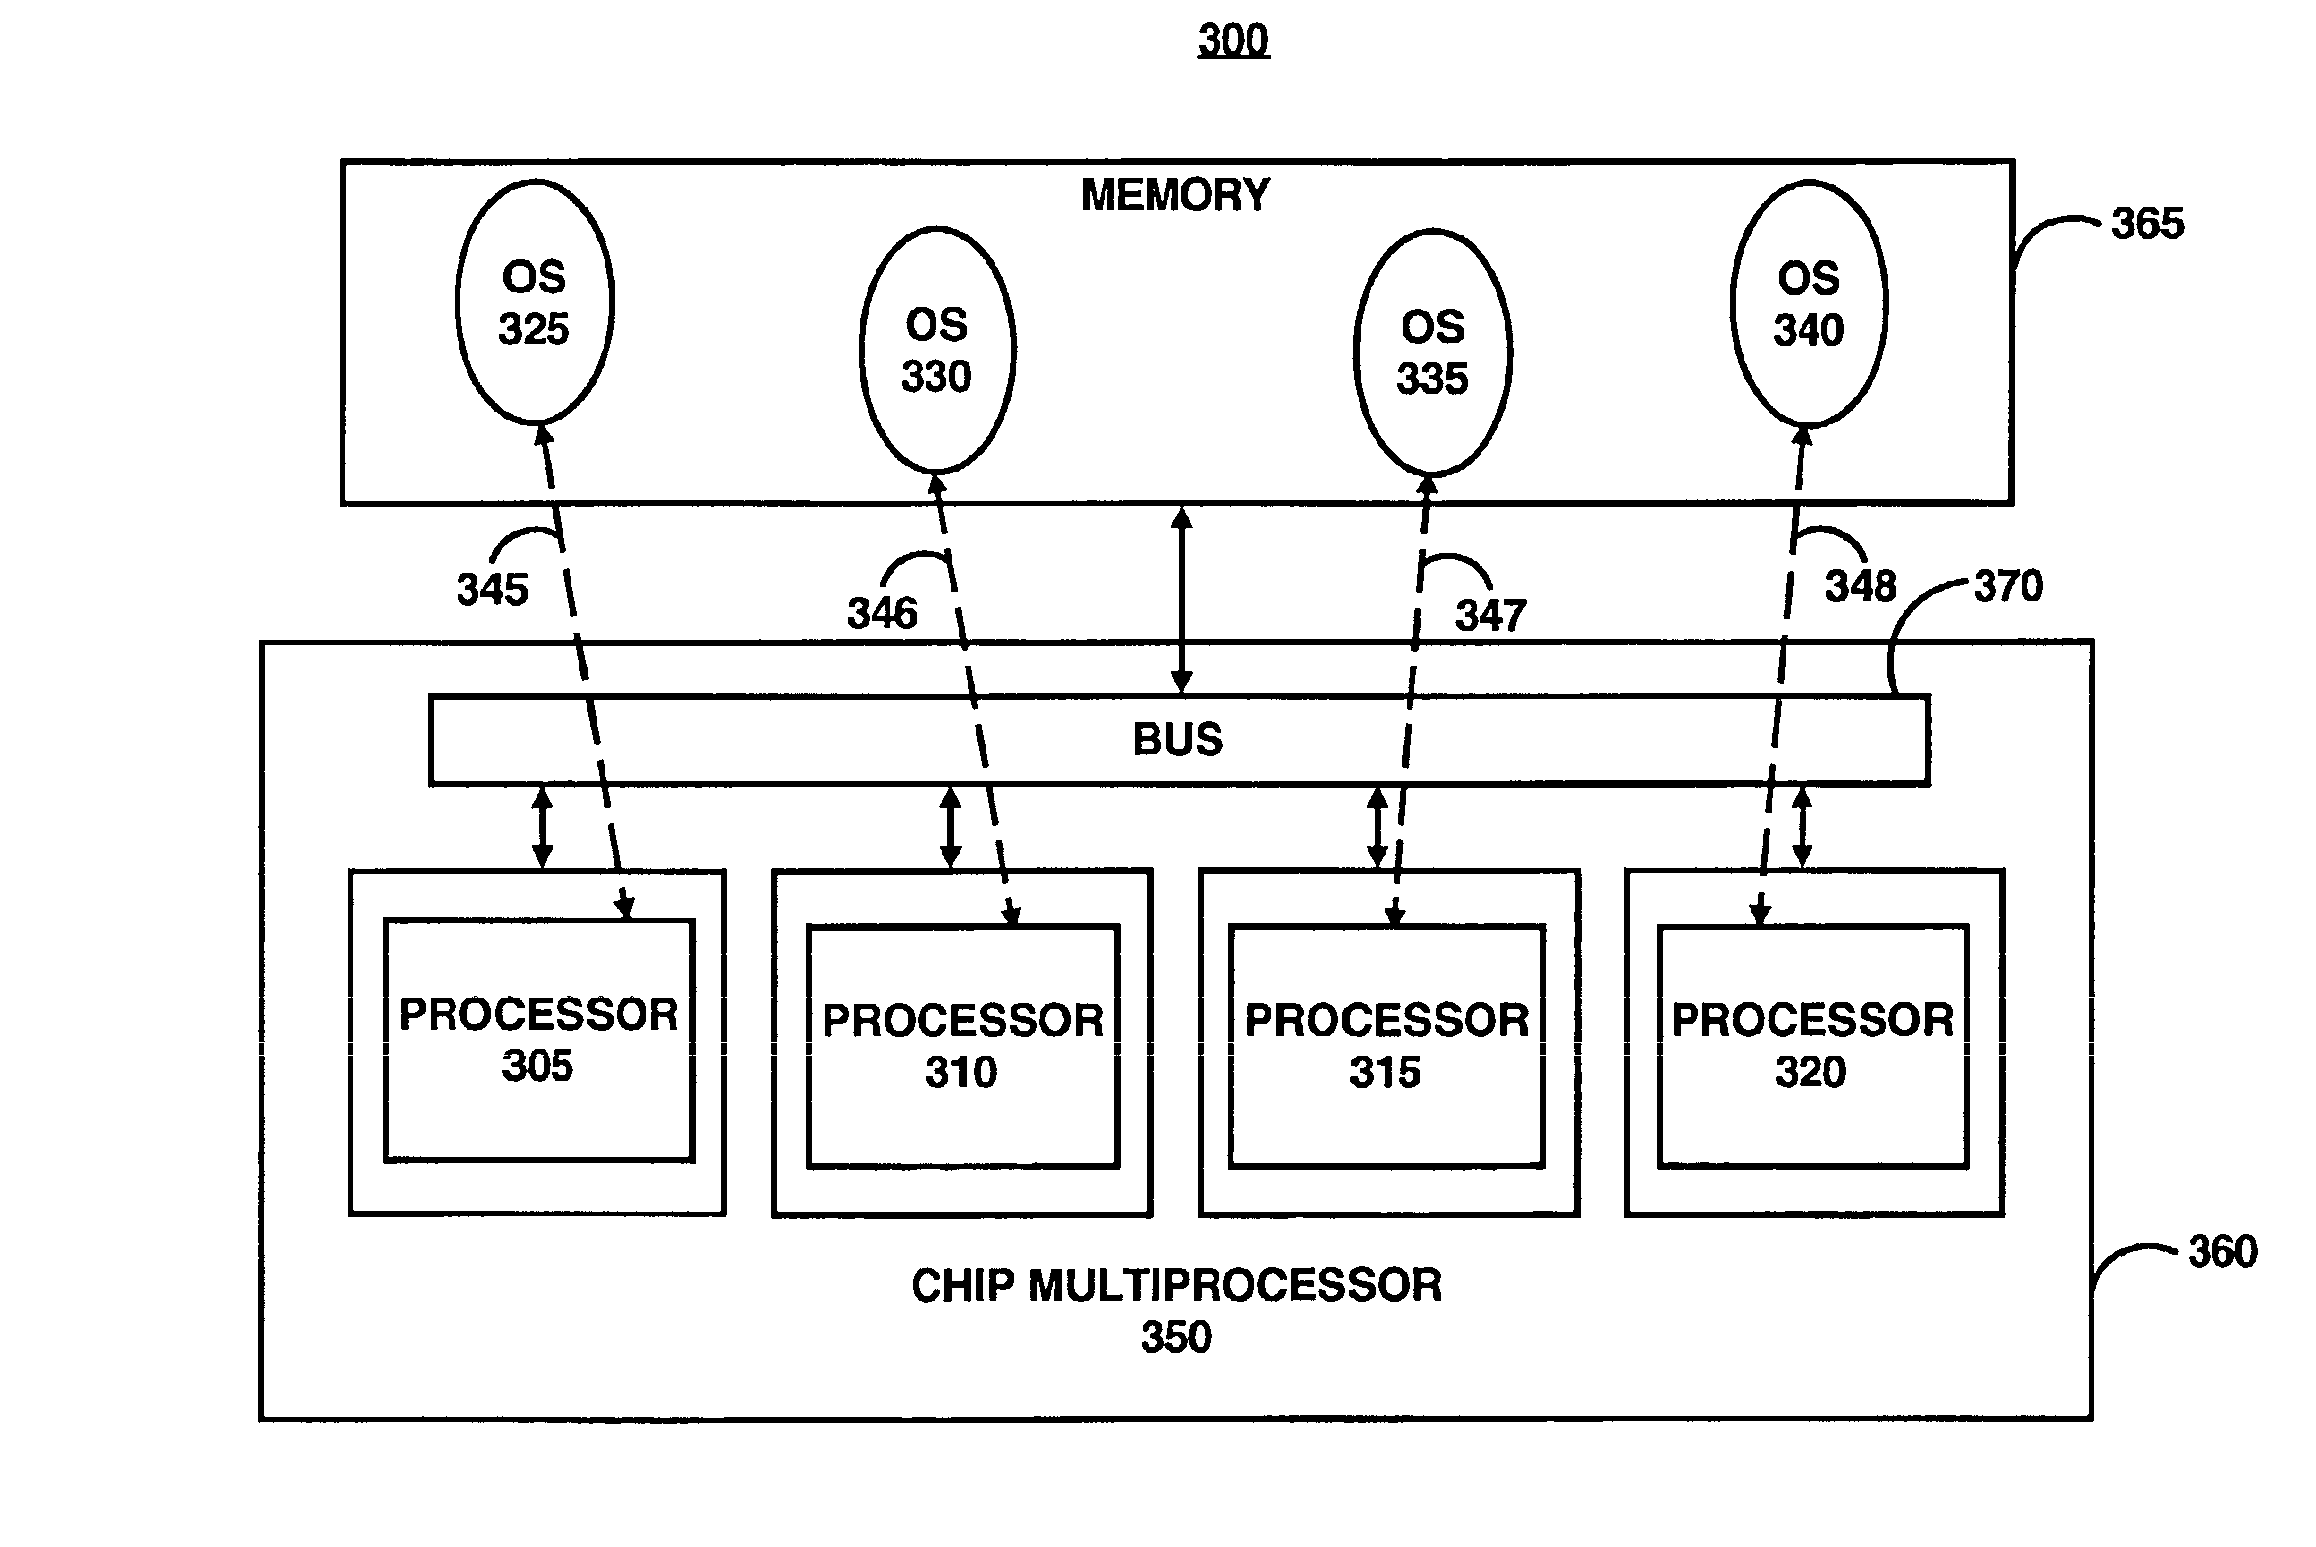 Chip multiprocessor with multiple operating systems